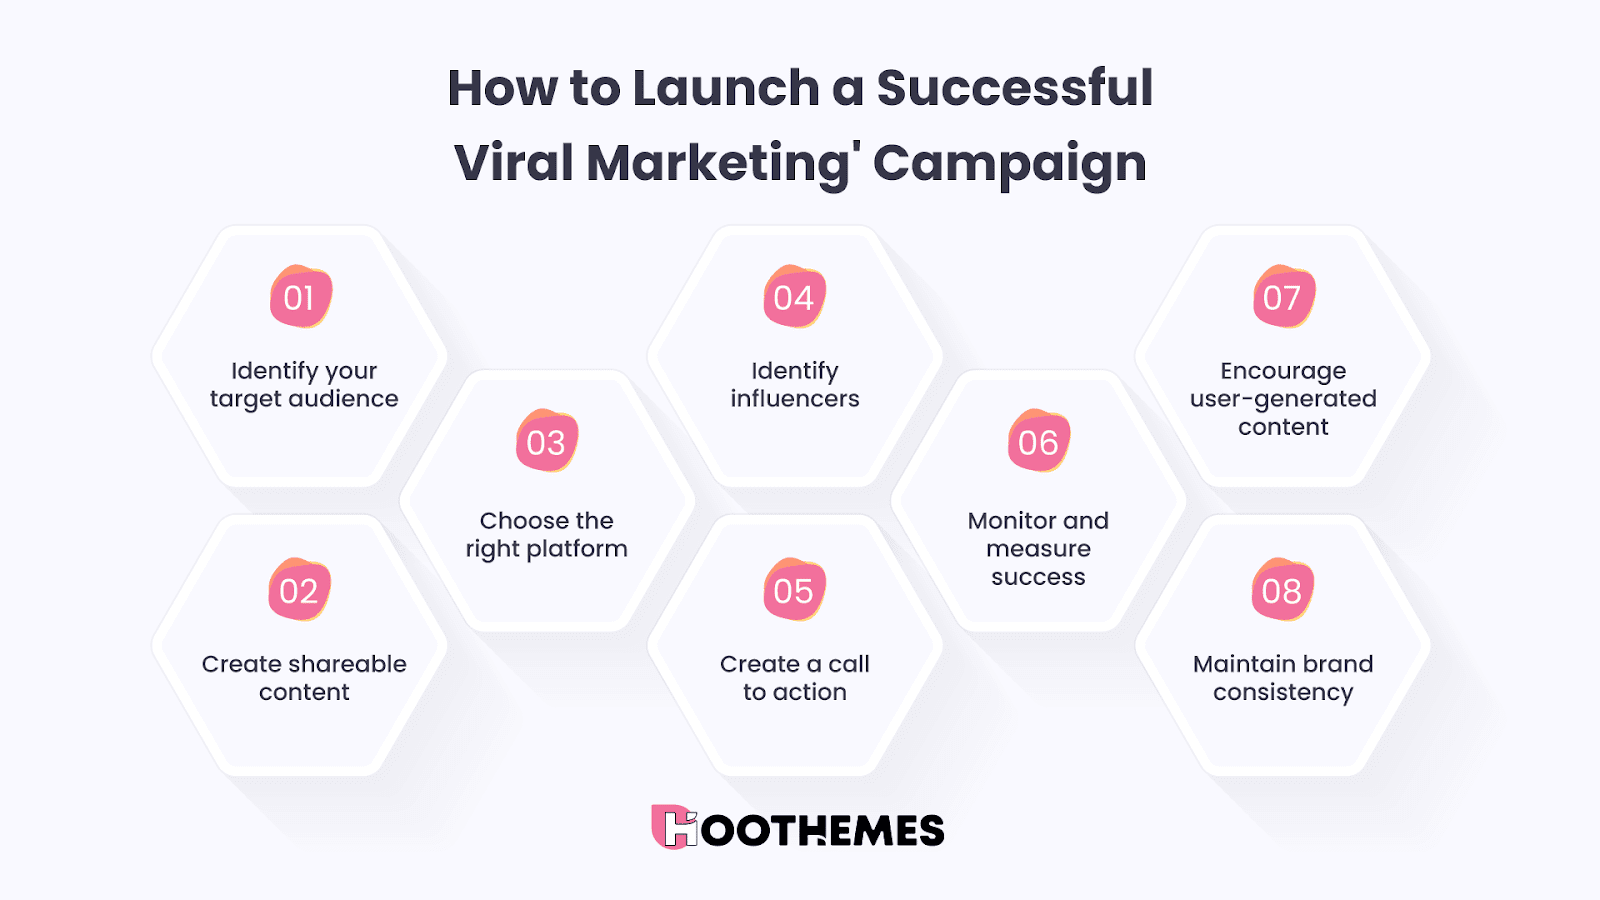 How to Launch a Successful Viral Marketing Campaign